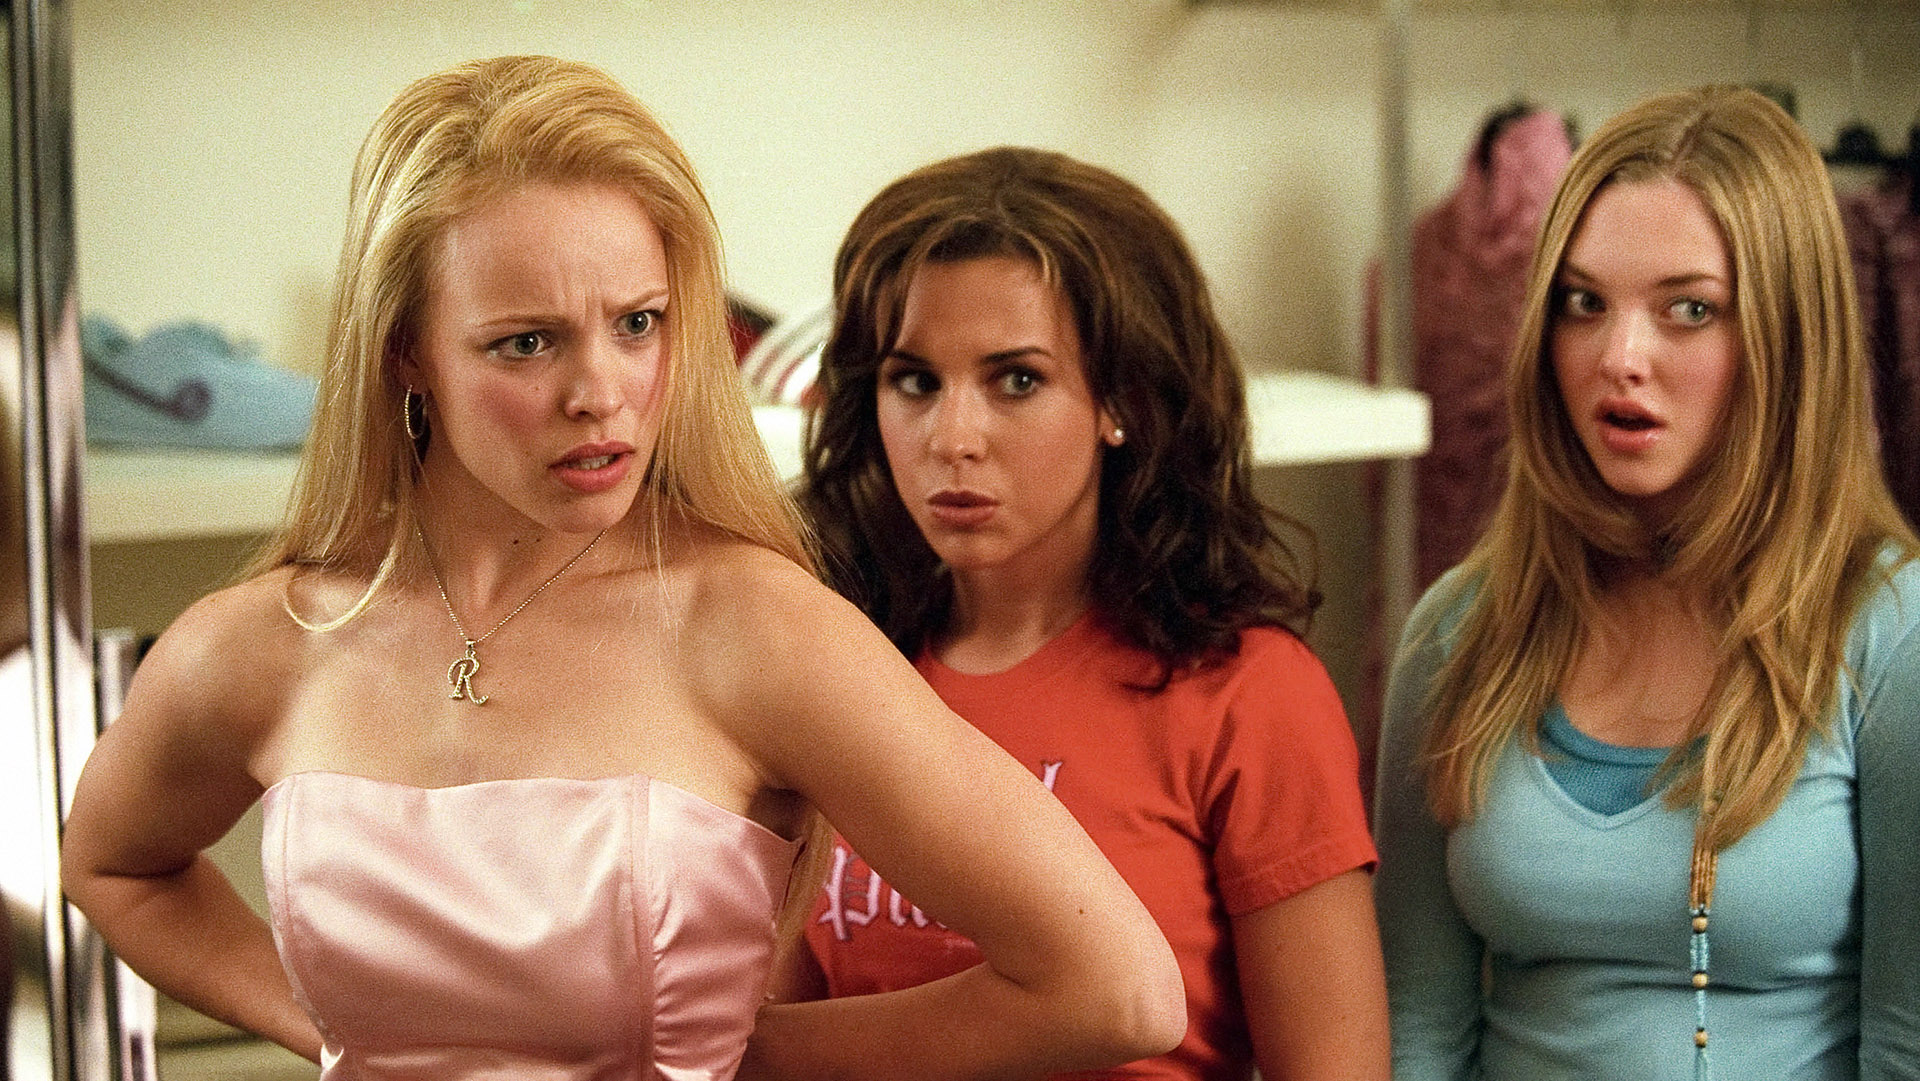 Is Mean Girls Reboot Happening After All?